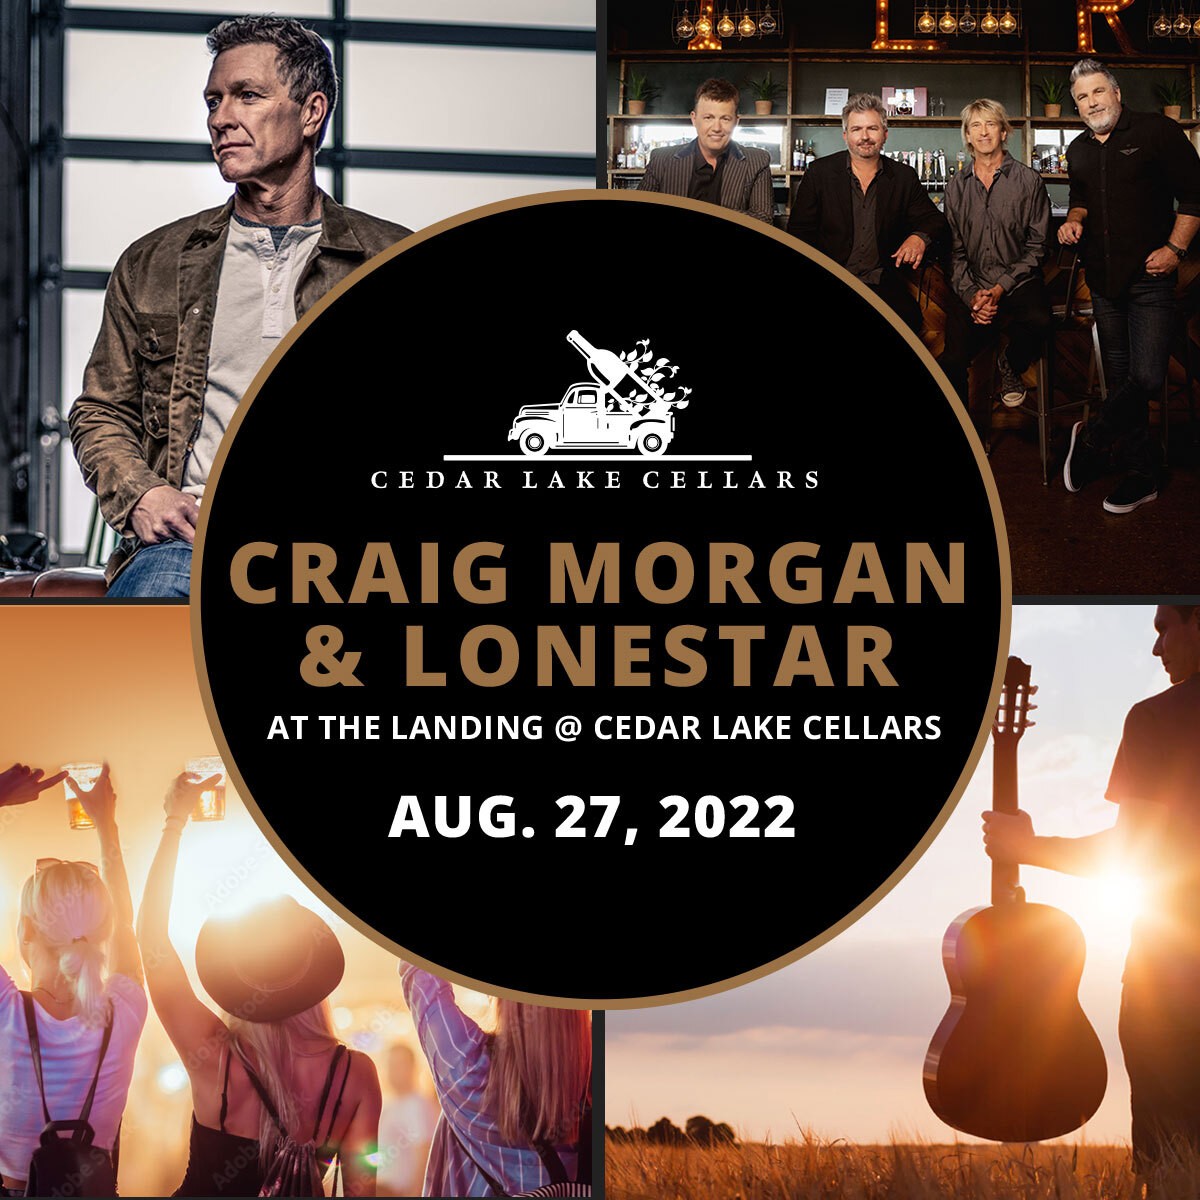 Don't miss this exclusive country music event with iconic artists, Craig Morgan and Lonestar.